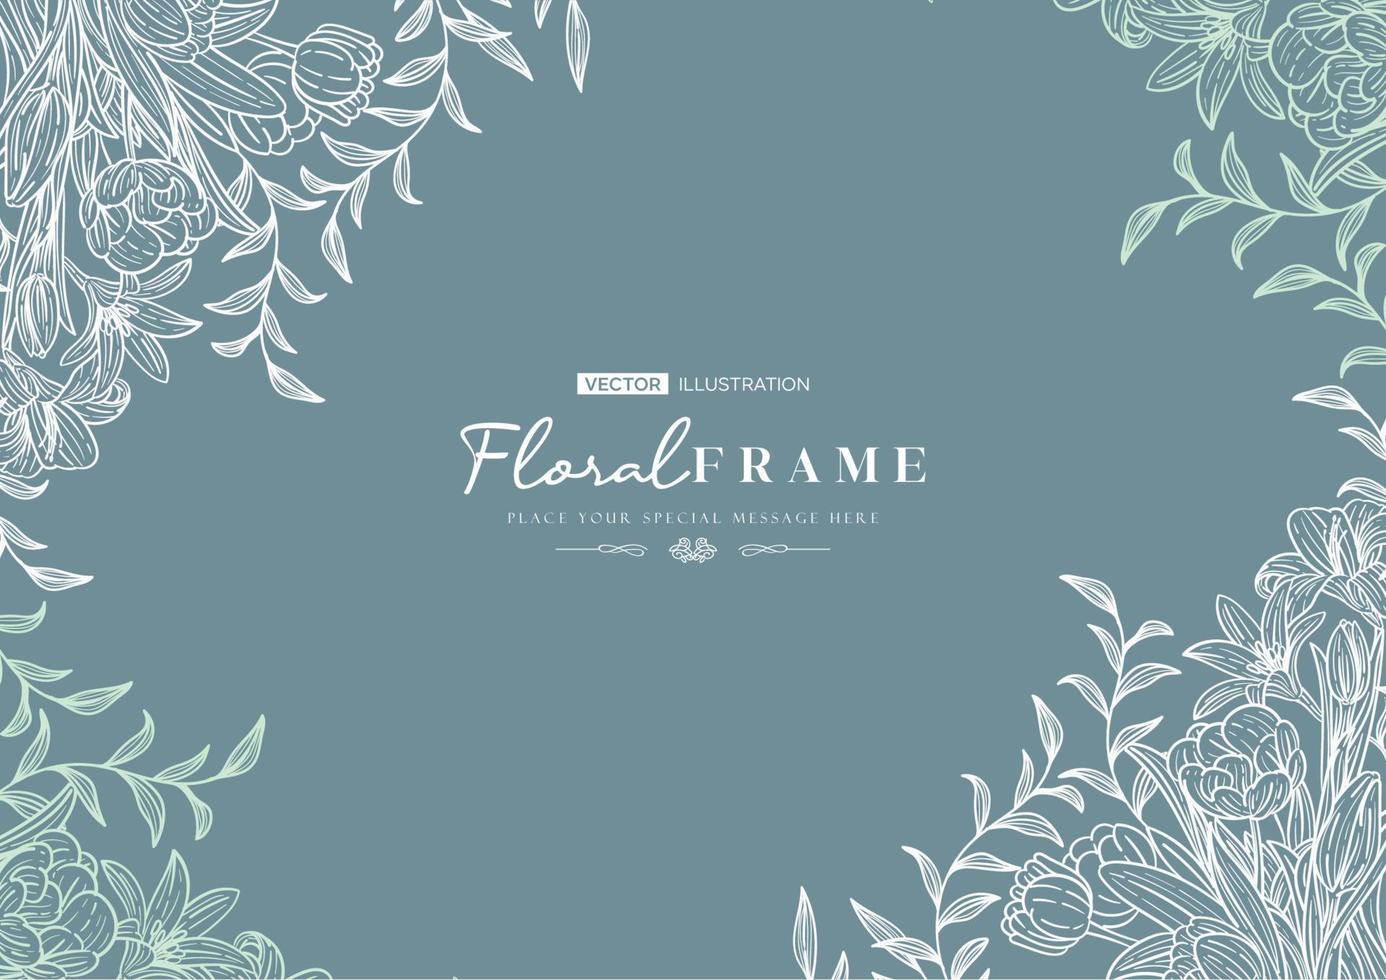 Floral background with beautiful flower vector